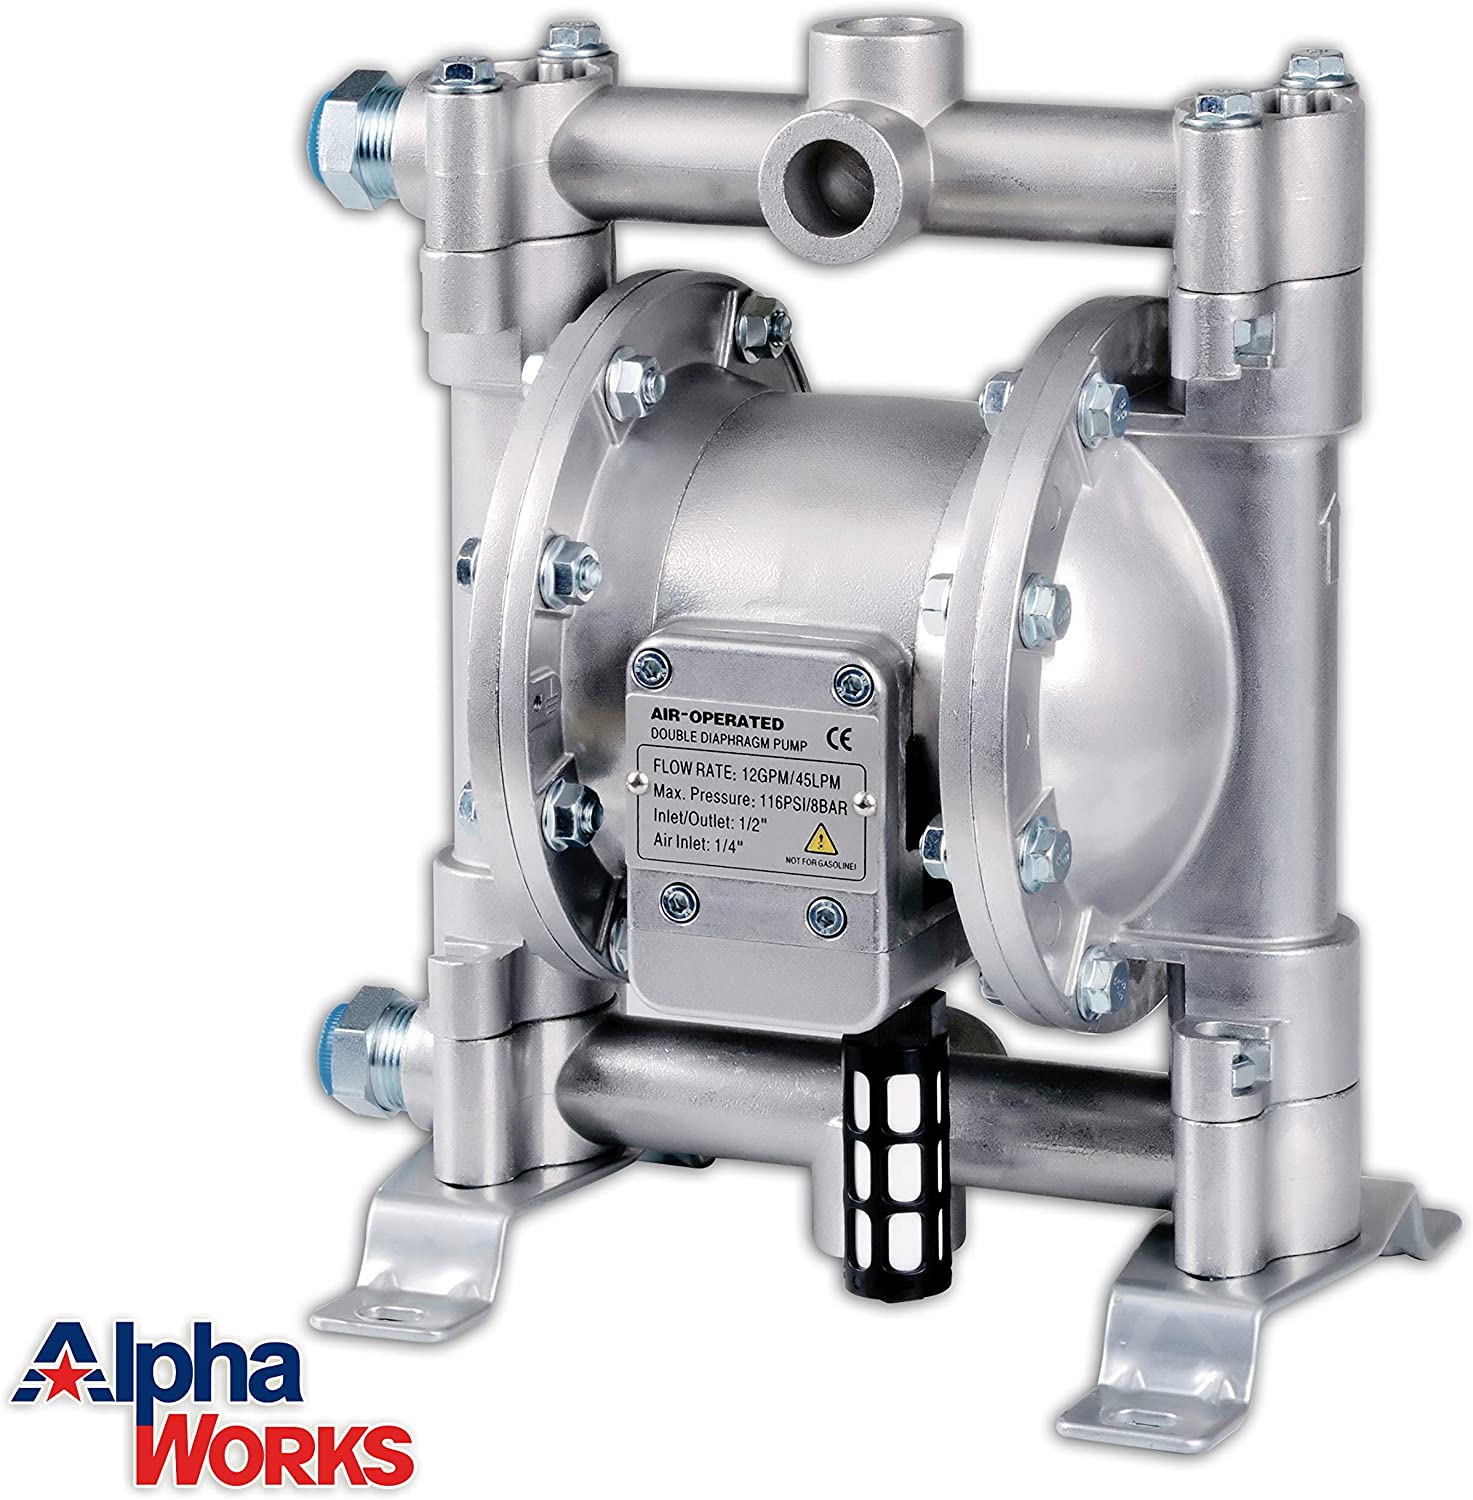 Alpha Works, Alpha Works GUF014 12GPM 1/2" In/Out 1/4" NPT Air Inlet Air Powered Nitrile Double Diaphragm Transfer Pump New